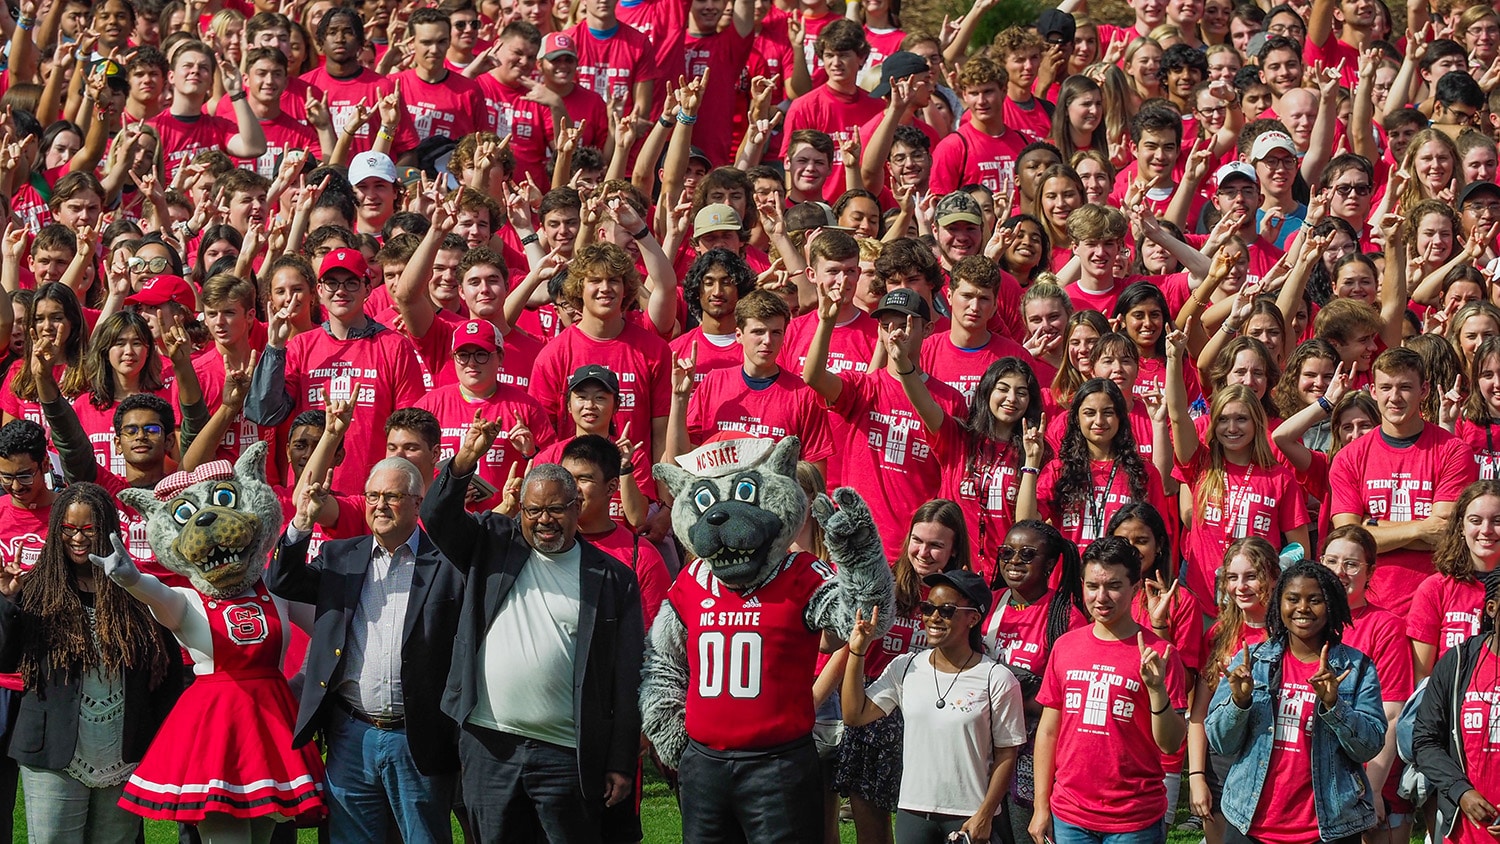 A large group of students wearing matching NC State shirts pose with the Chancellor, faculty members and Mr. and Ms. Wuf for a photo.